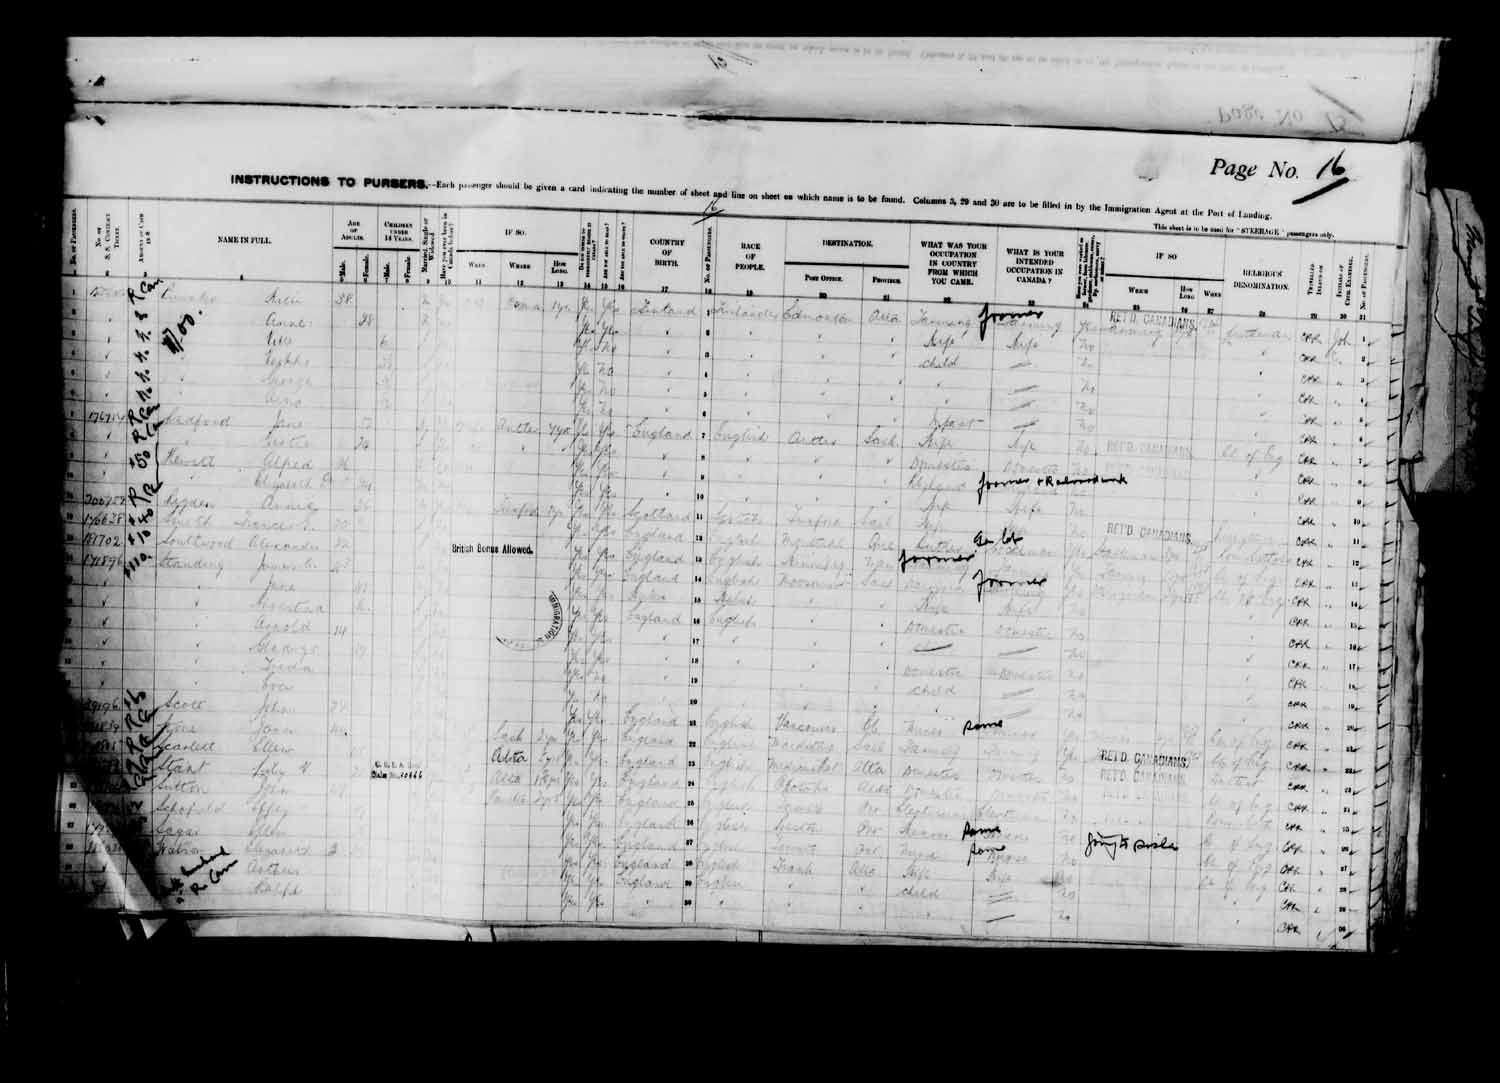 Digitized page of Passenger Lists for Image No.: e003627205